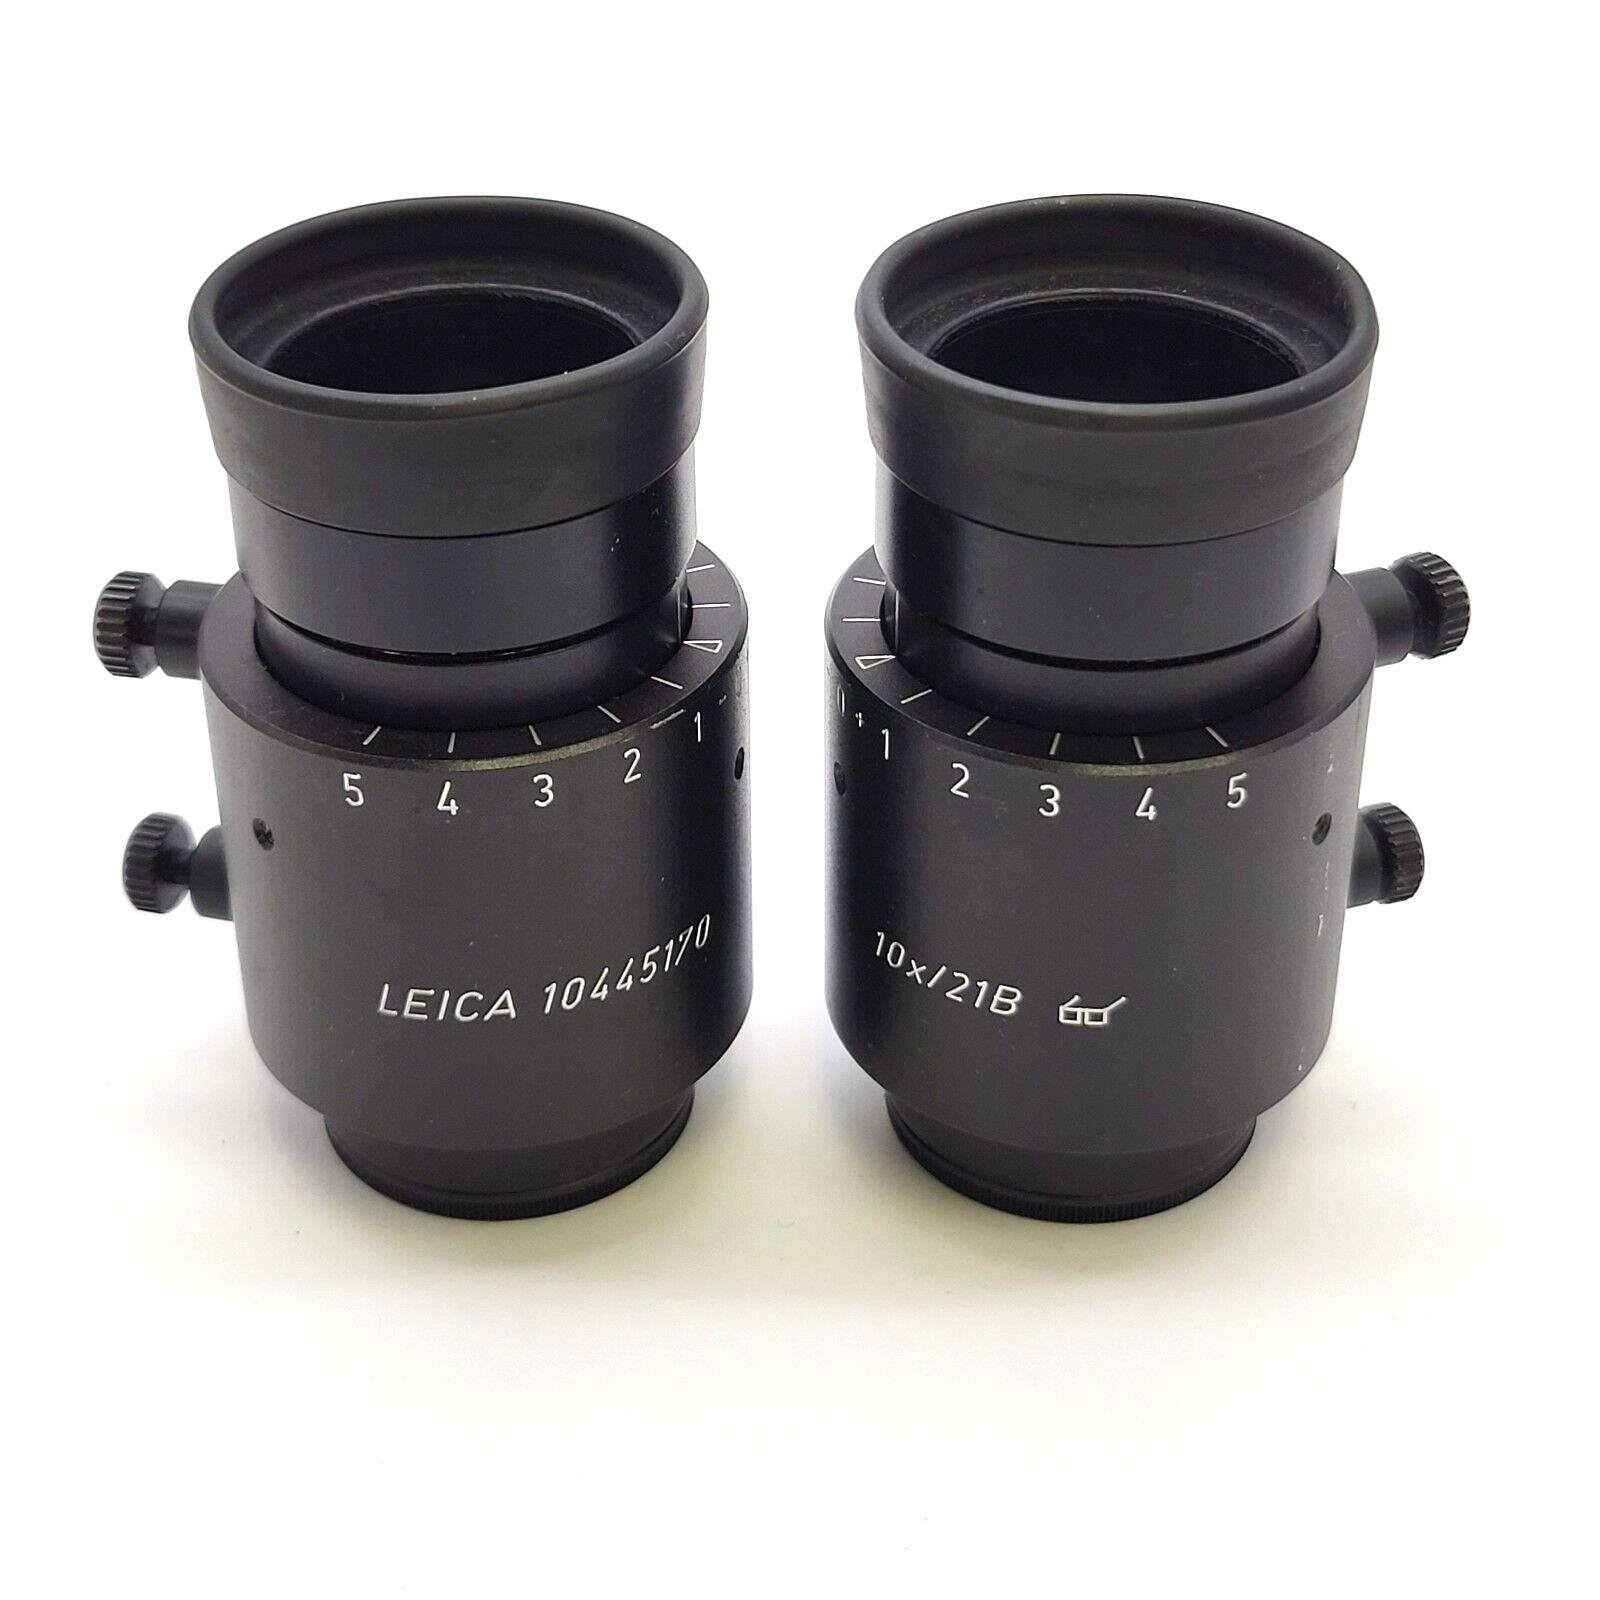 Leica Surgical Operating Microscope Eyepieces 10x/21B 10445170